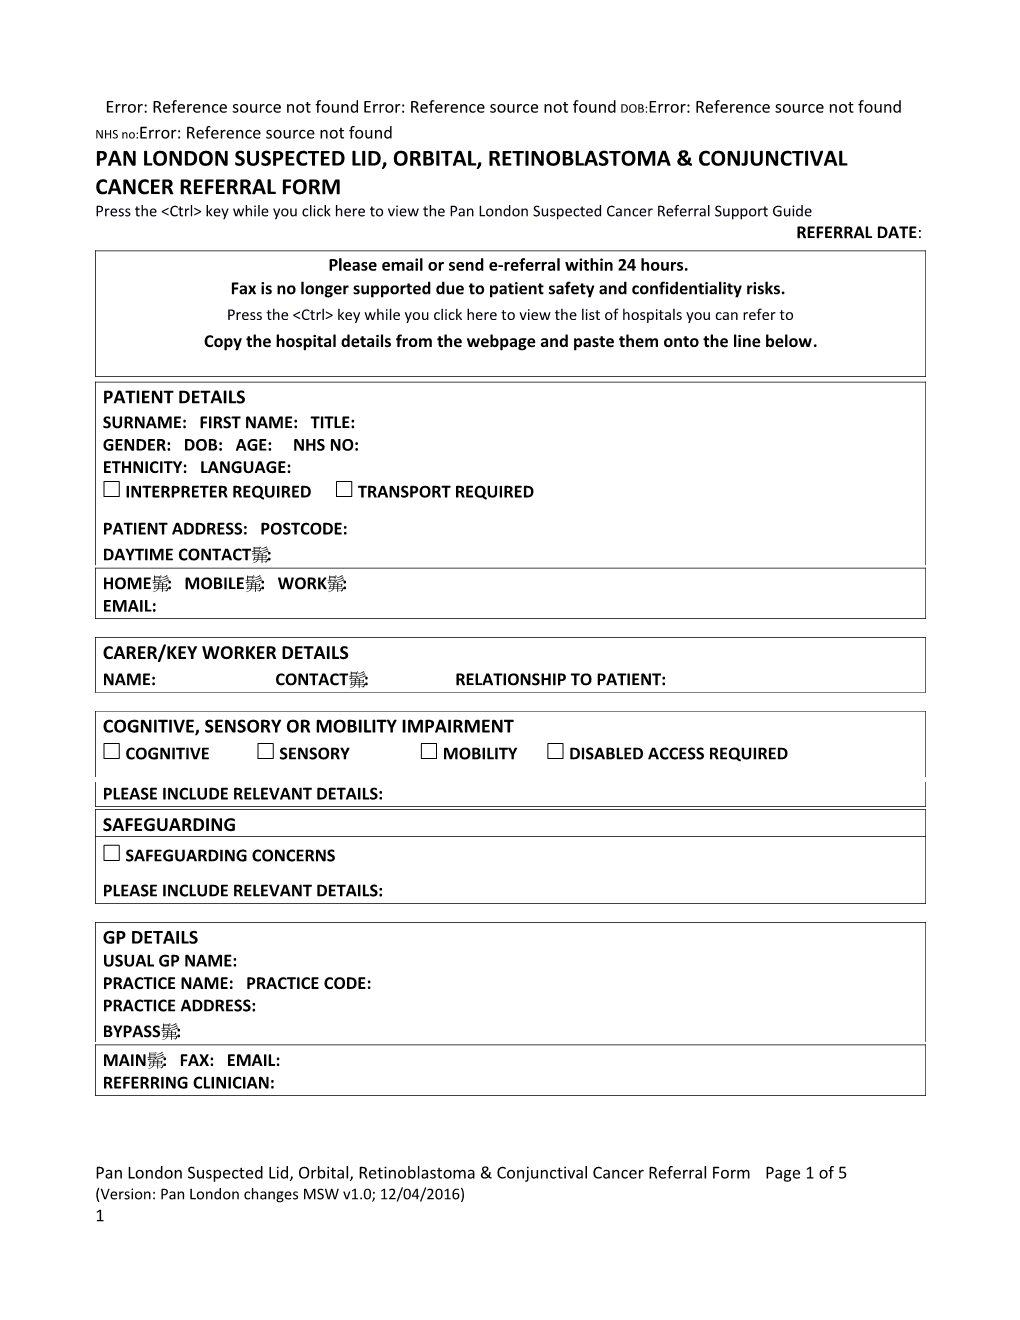 Ophthalmology 2 Week Referral Form